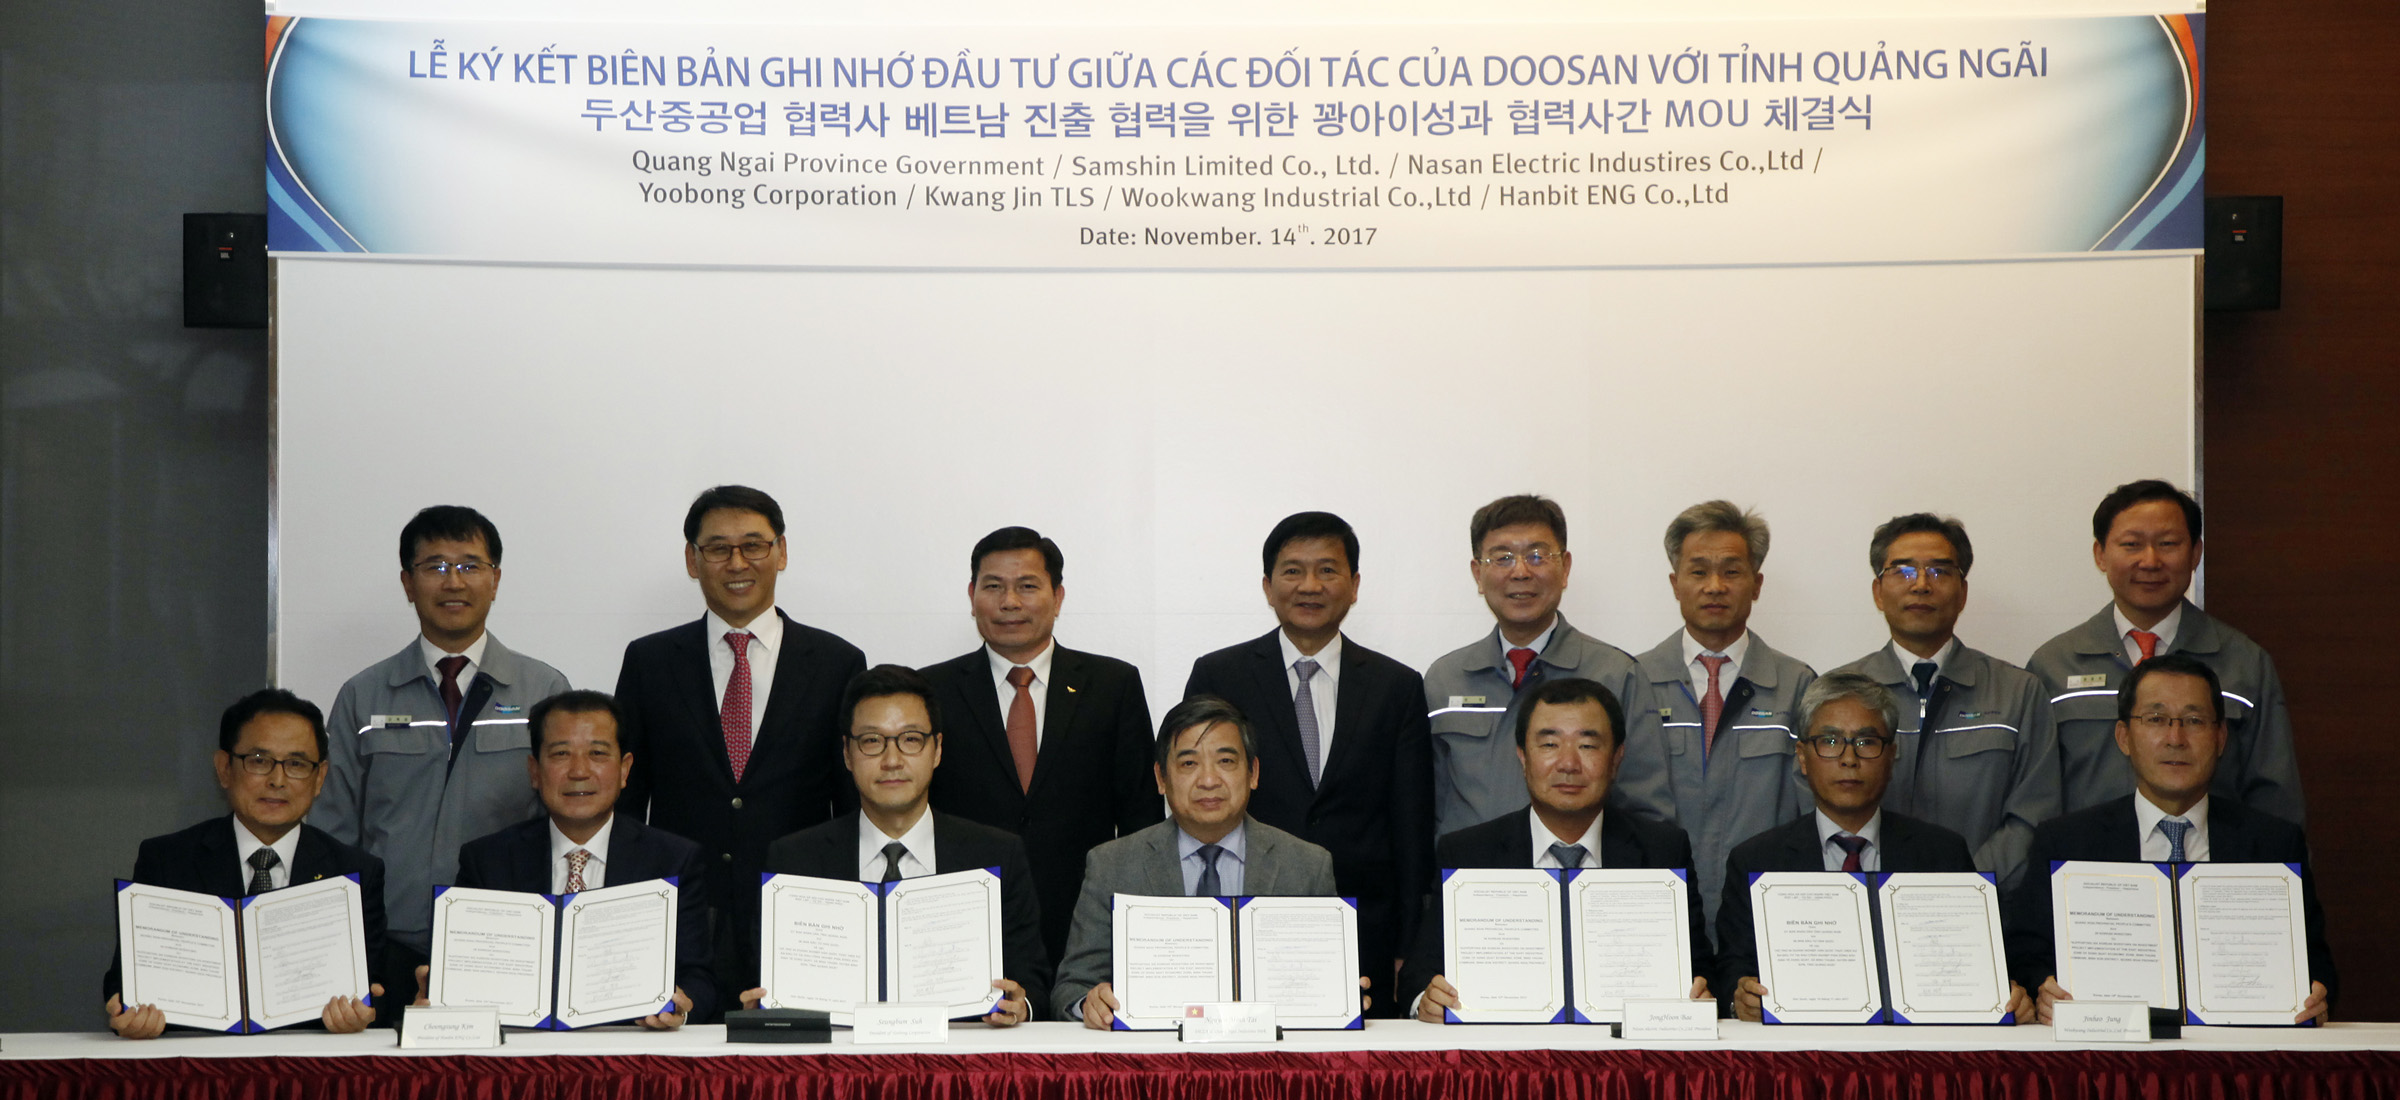 Dung Quat EZ finds fruitful partnership in Korea, SOE reform to fuel higher economic growth, Da Nang to host ASEAN Banking Council Meeting, Viet Nam Expo to begin on December 6